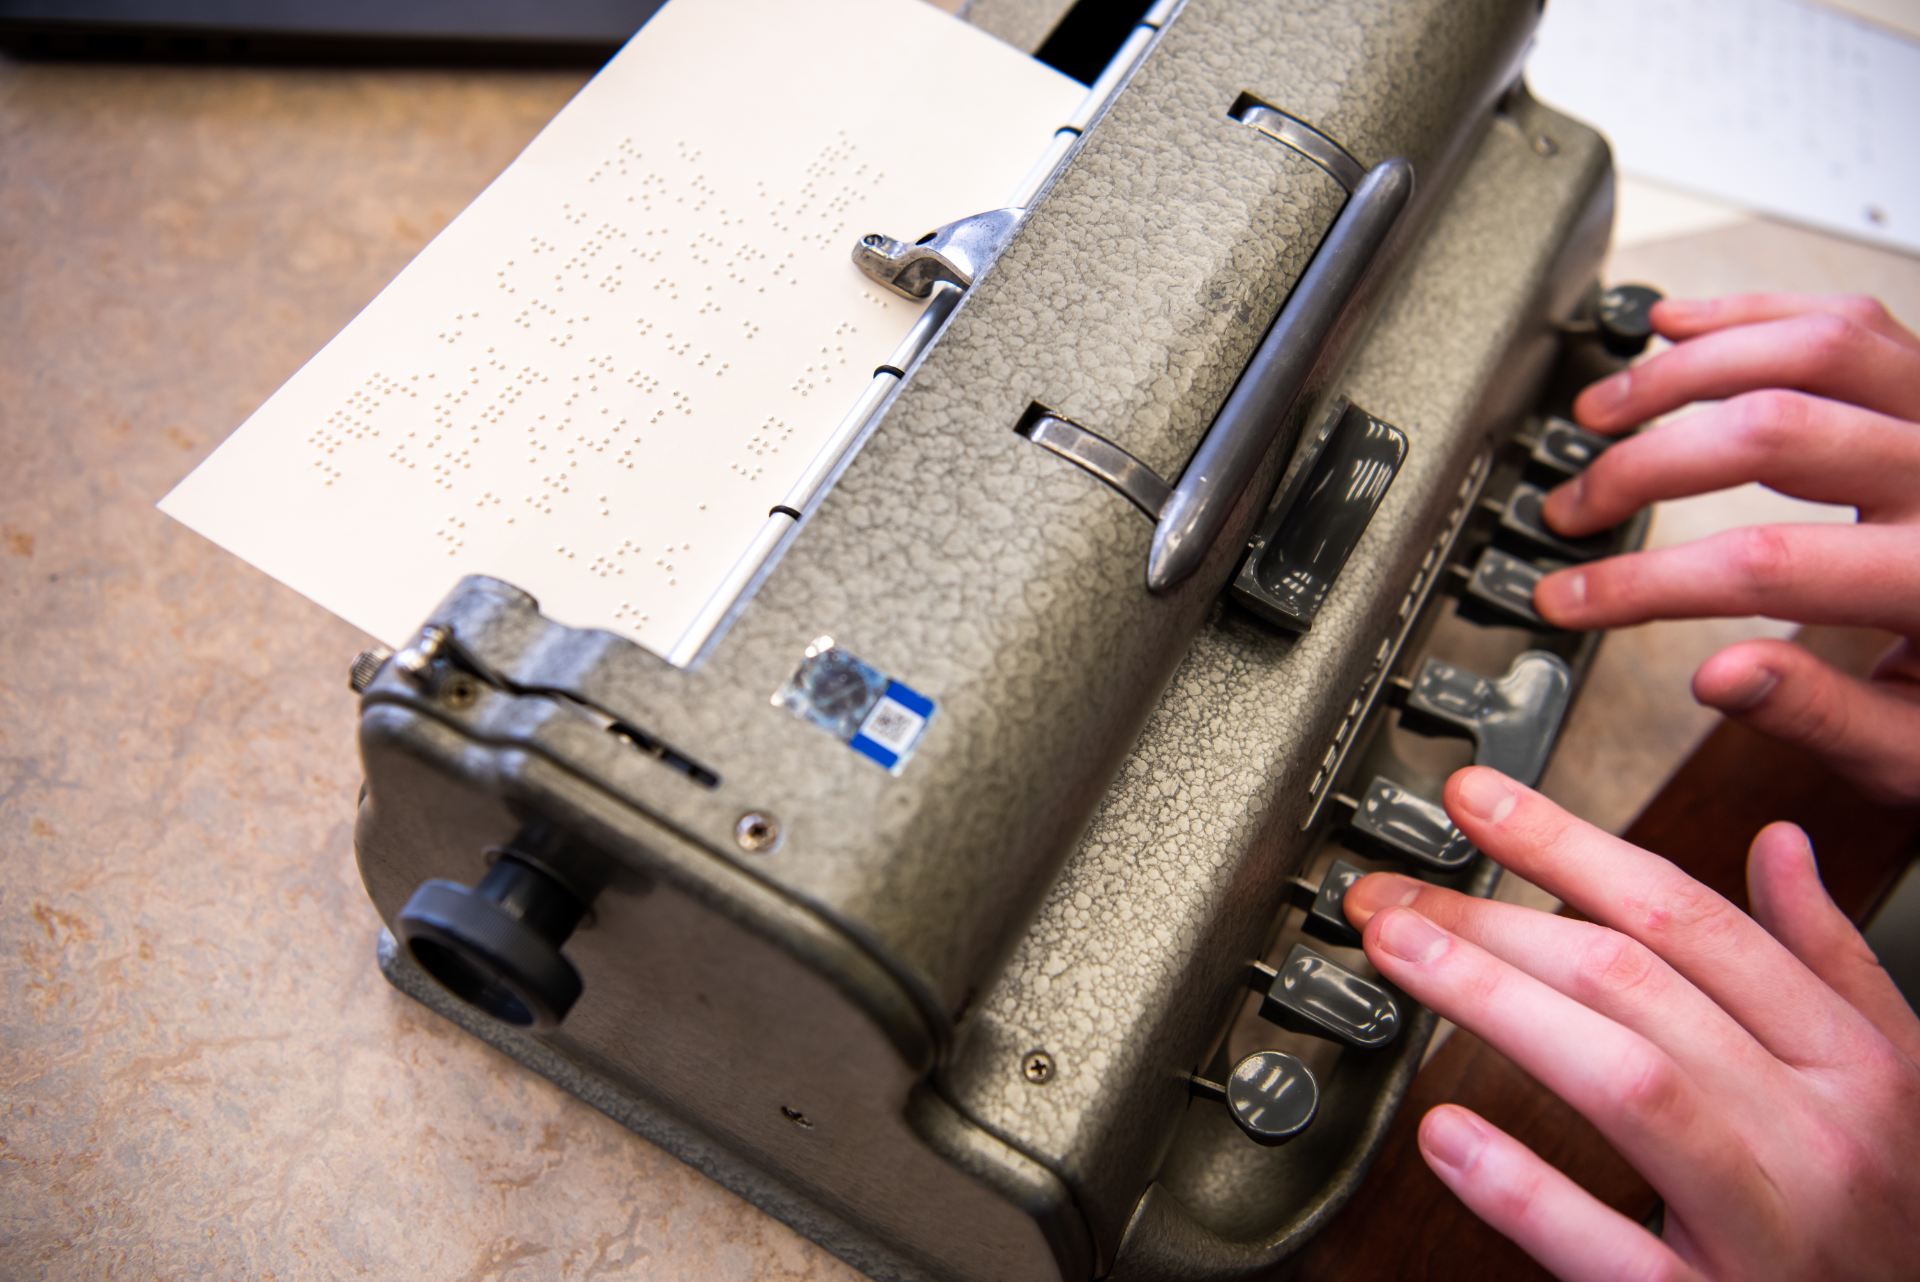 Close up shot of Martin's hands as she practices her braille with a brailler.